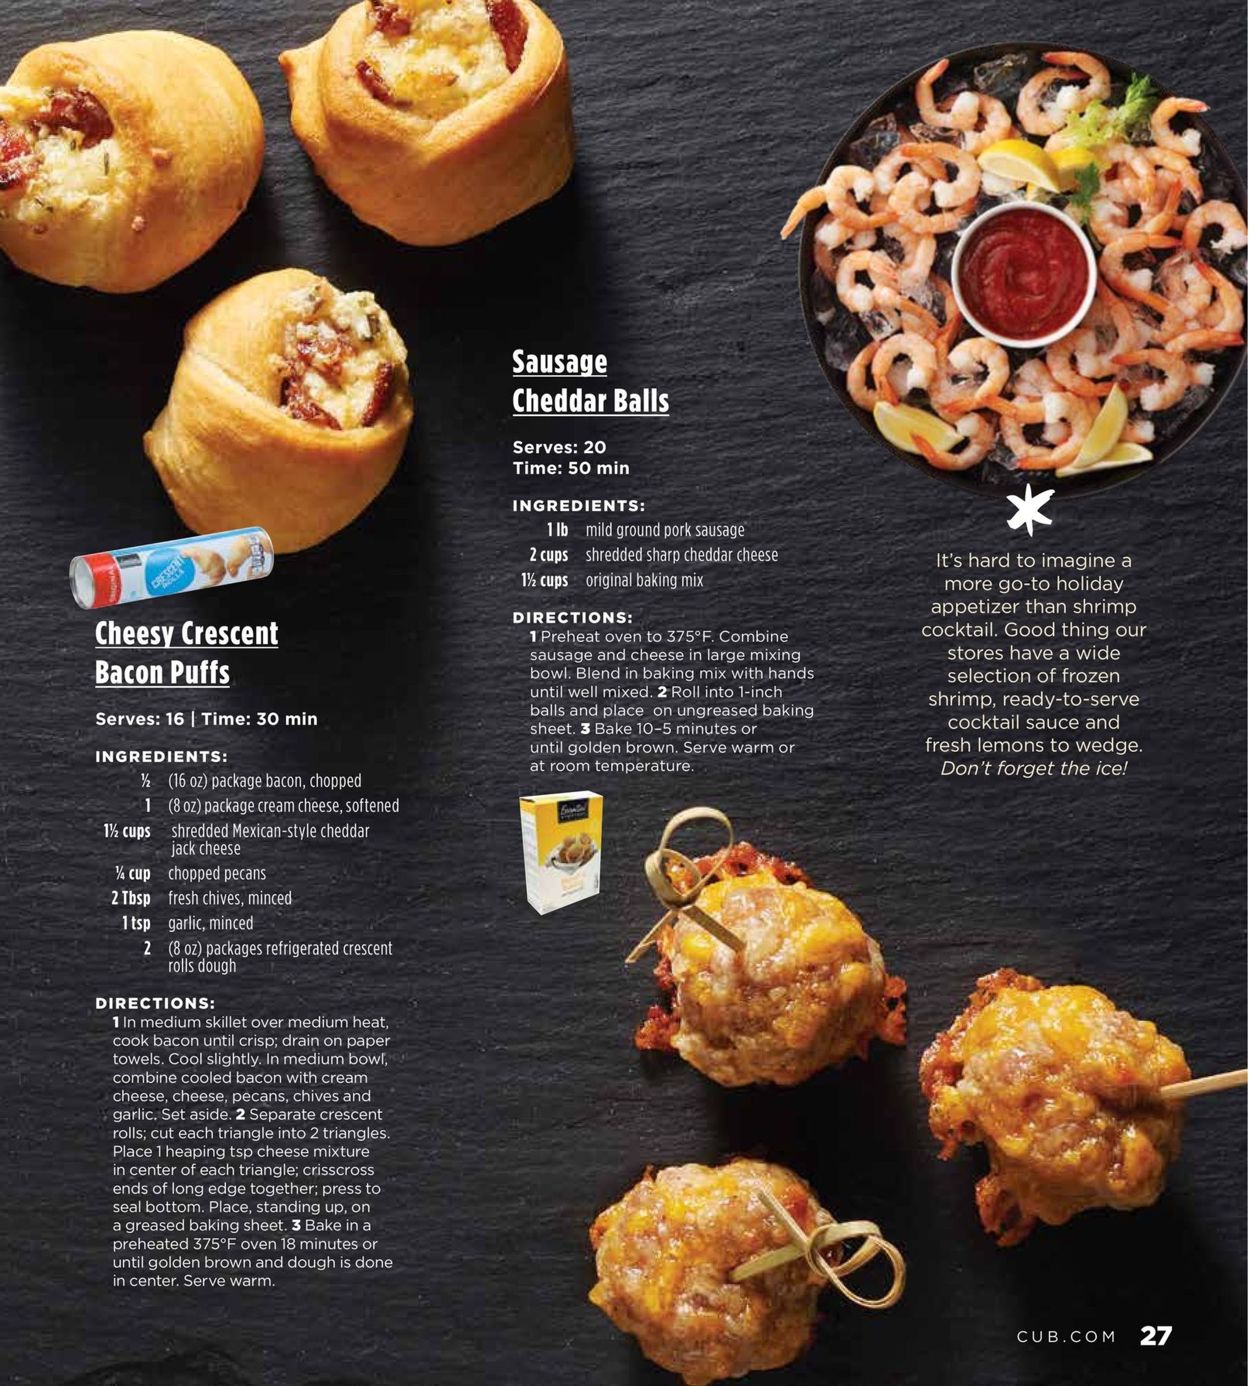 Cub Foods Ad from 10/03/2021